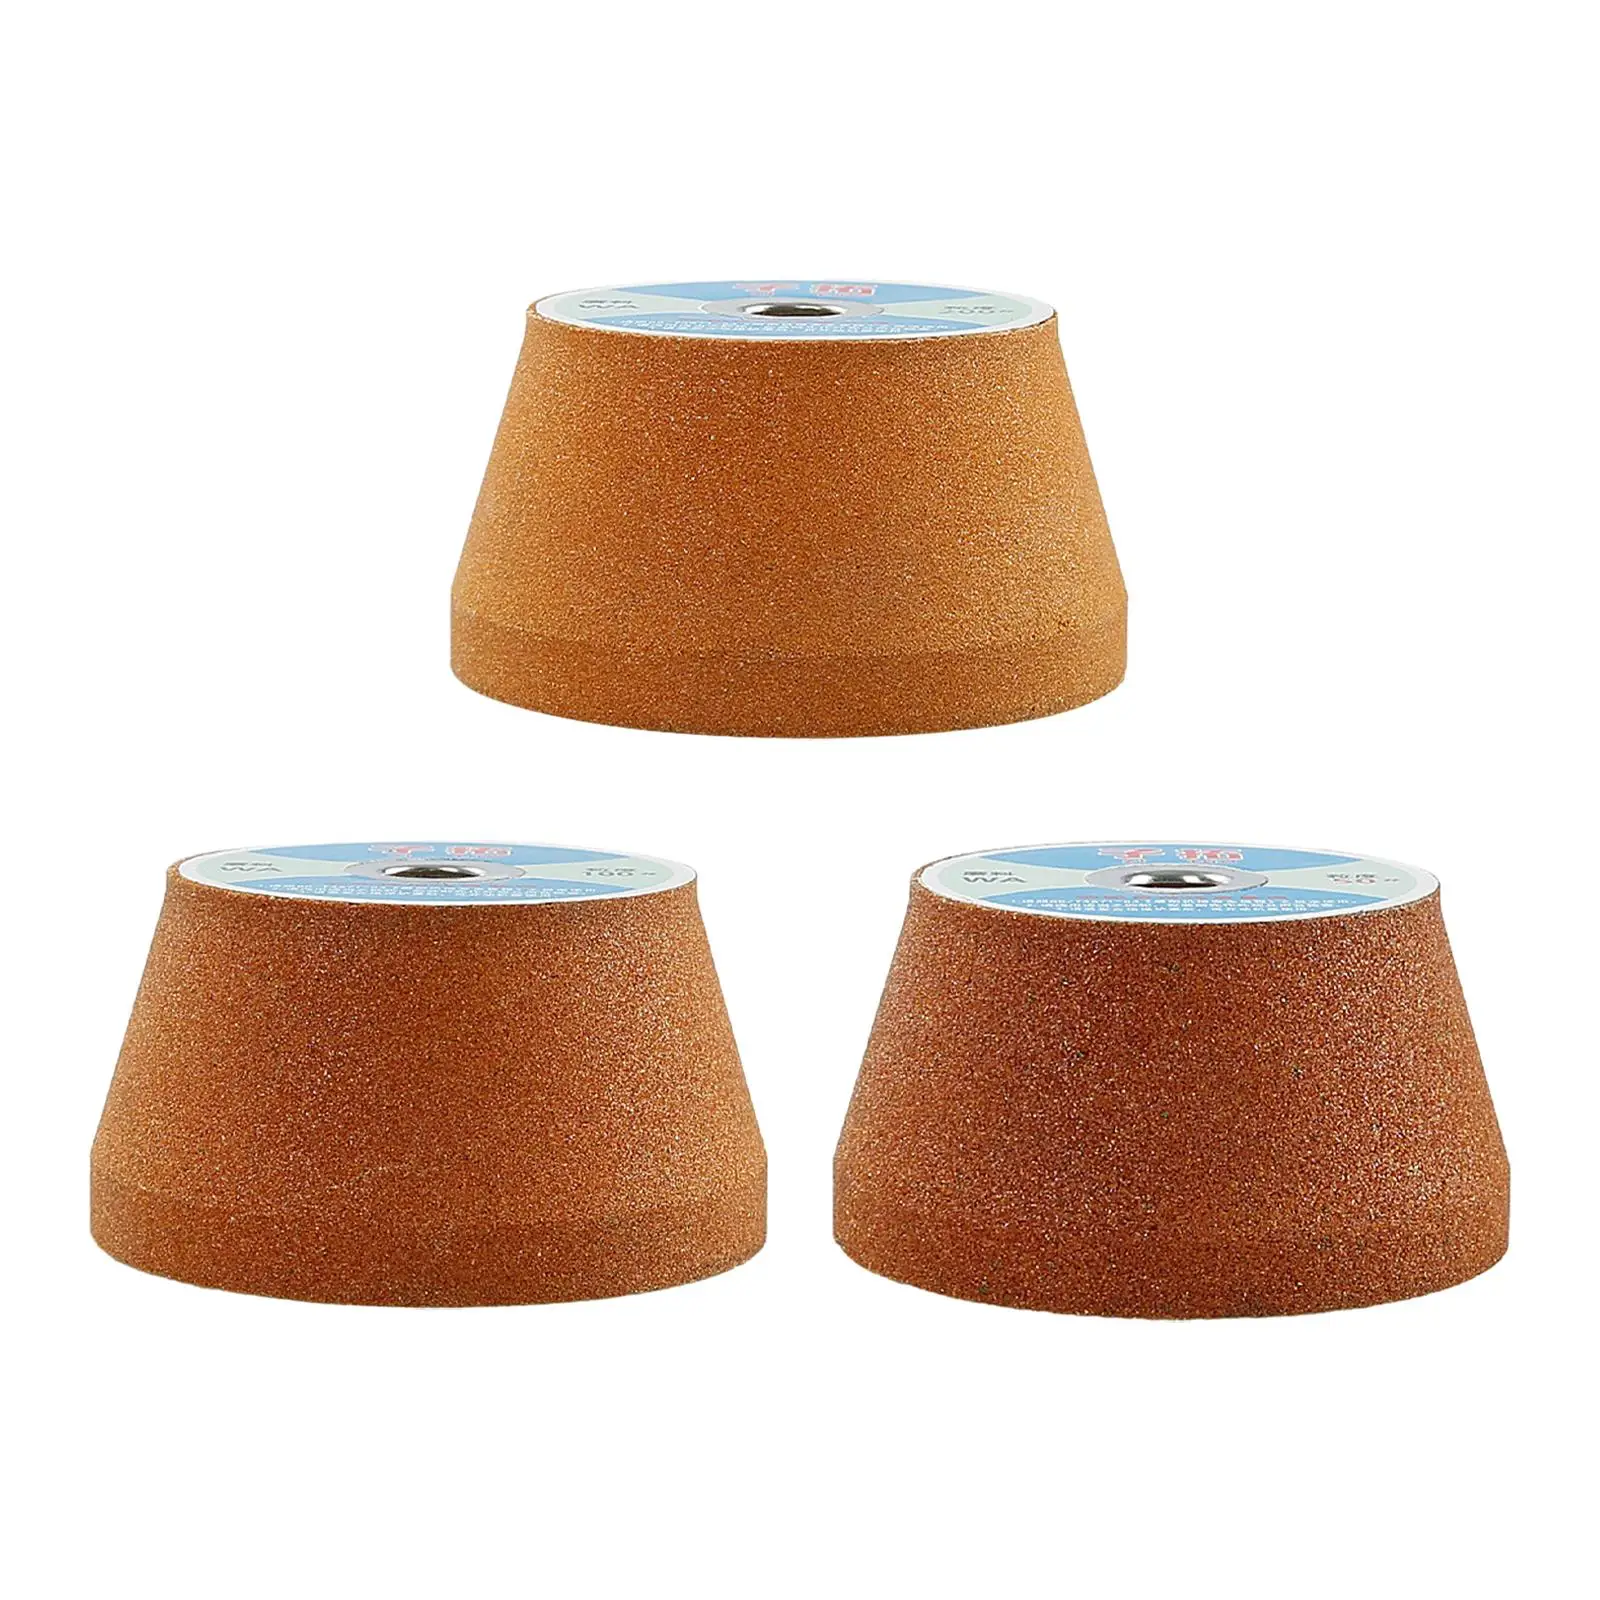 3 Pieces Angle Grinder Grinding Wheels Easy to Install White Fused Alumina Grinding Stone for Metal Stone Stainless Steel